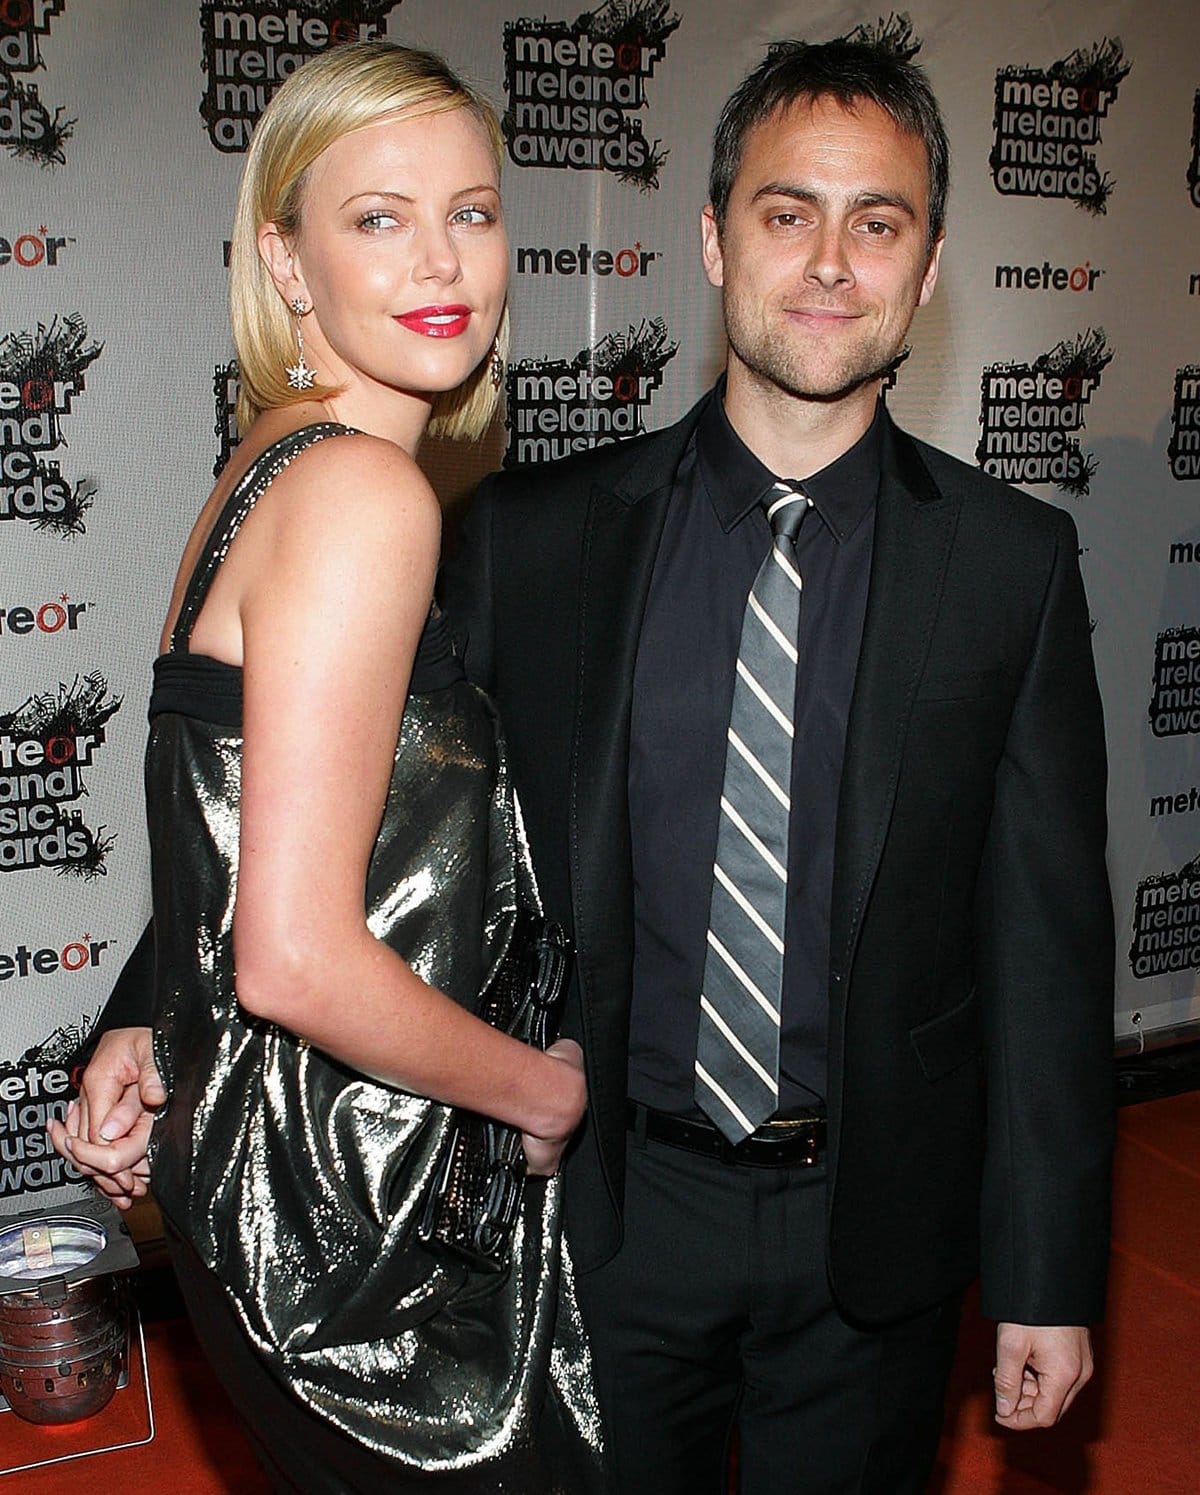 Charlize Theron and Stuart Townsend met on the set of the 2002 crime thriller film Trapped